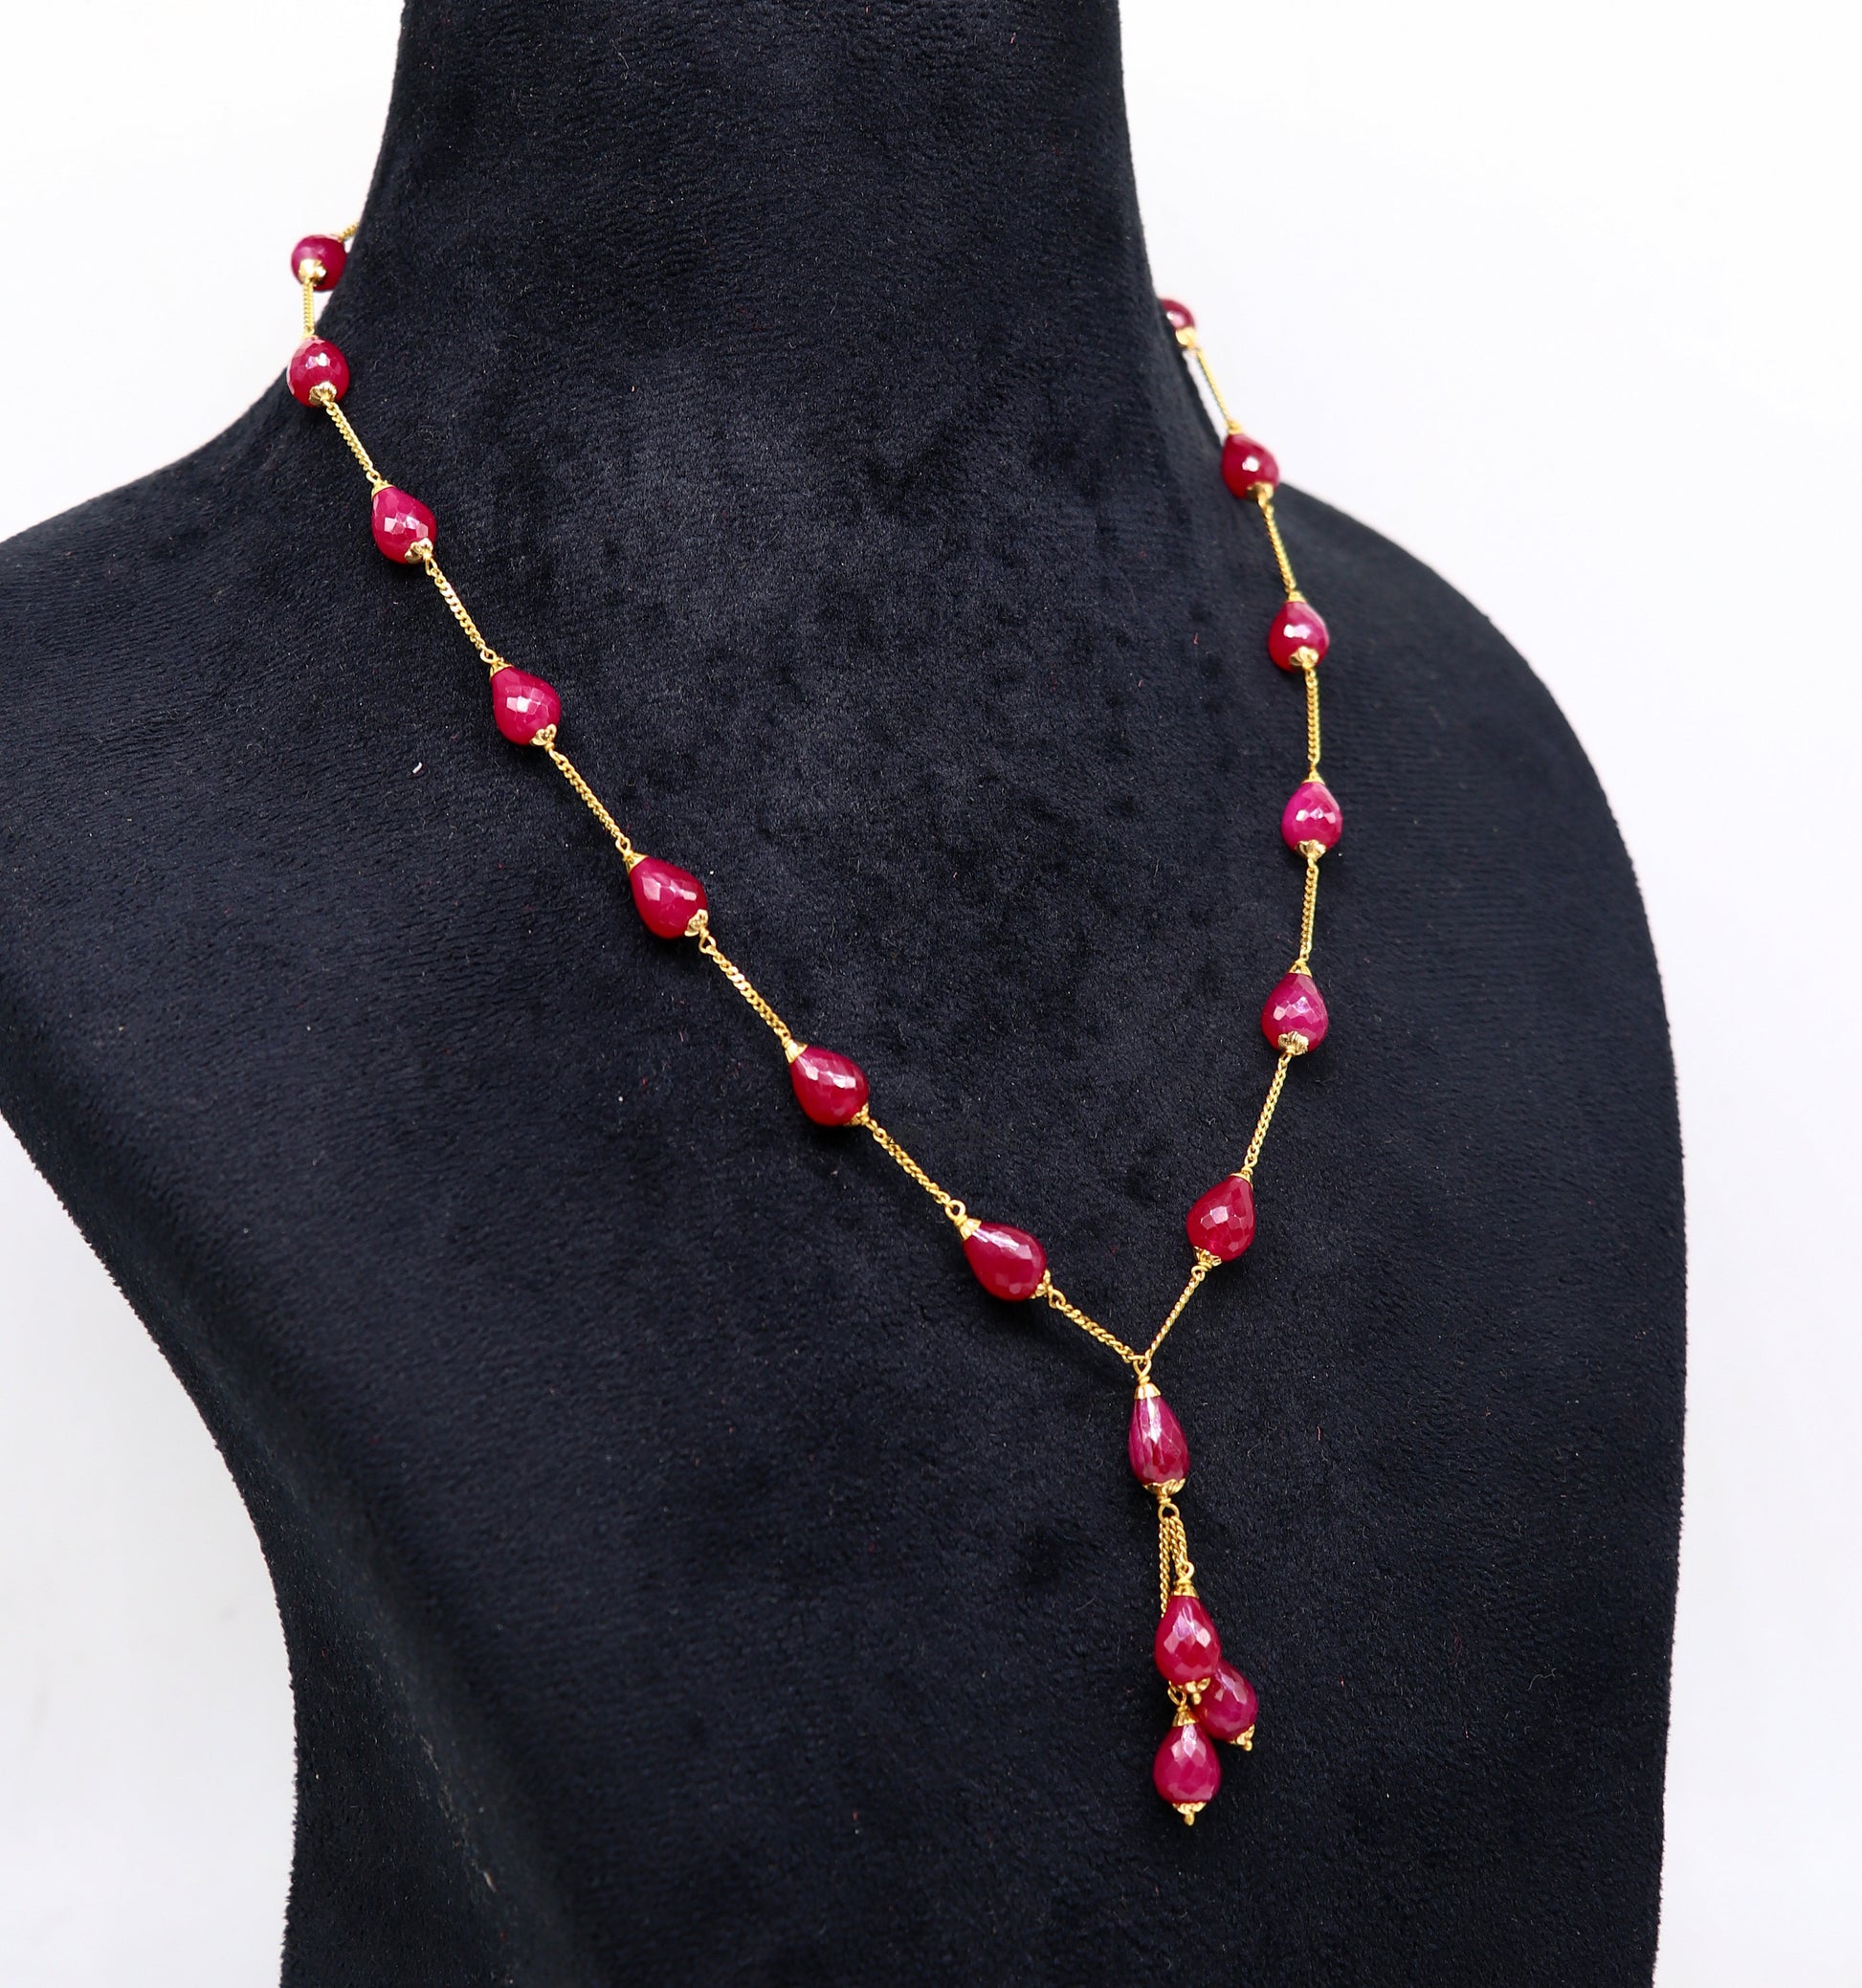 22Kt  yellow gold ruby beaded charm necklace best customized 18carat red ruby necklace brides jewelry setg - TRIBAL ORNAMENTS